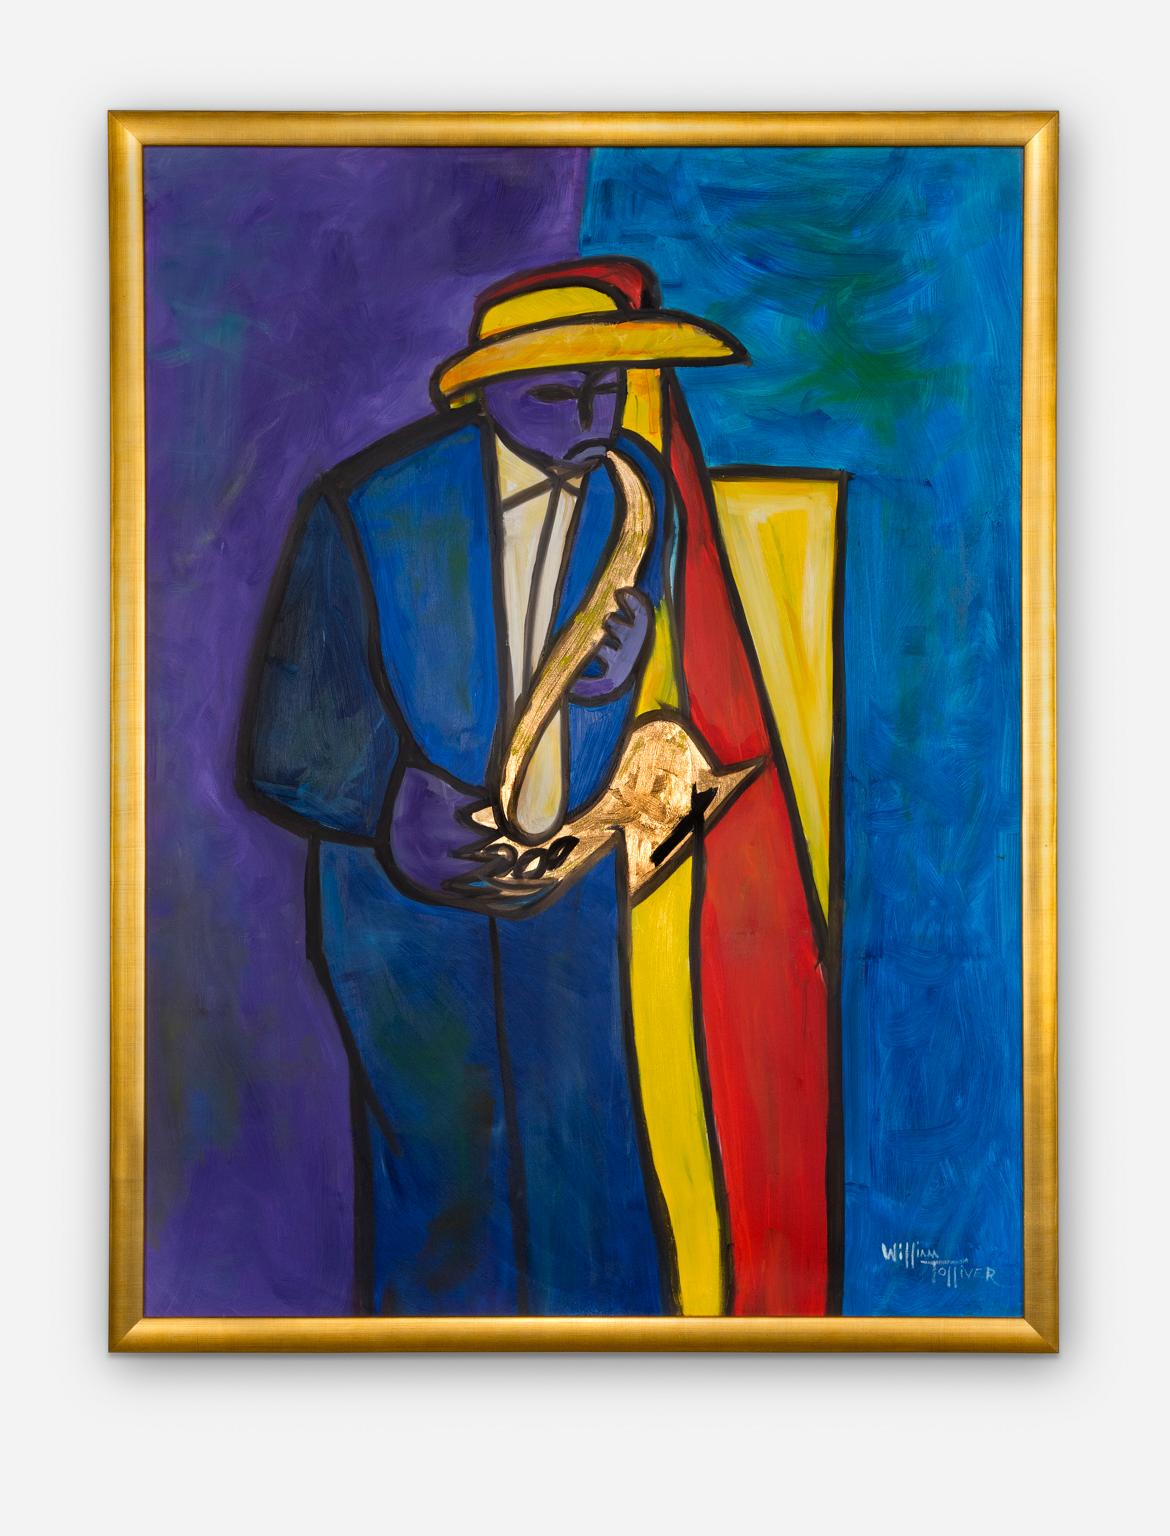 William Tolliver Abstract Painting - "Man With Saxophone" Abstract, Figurative, Colorful, Musician, African American